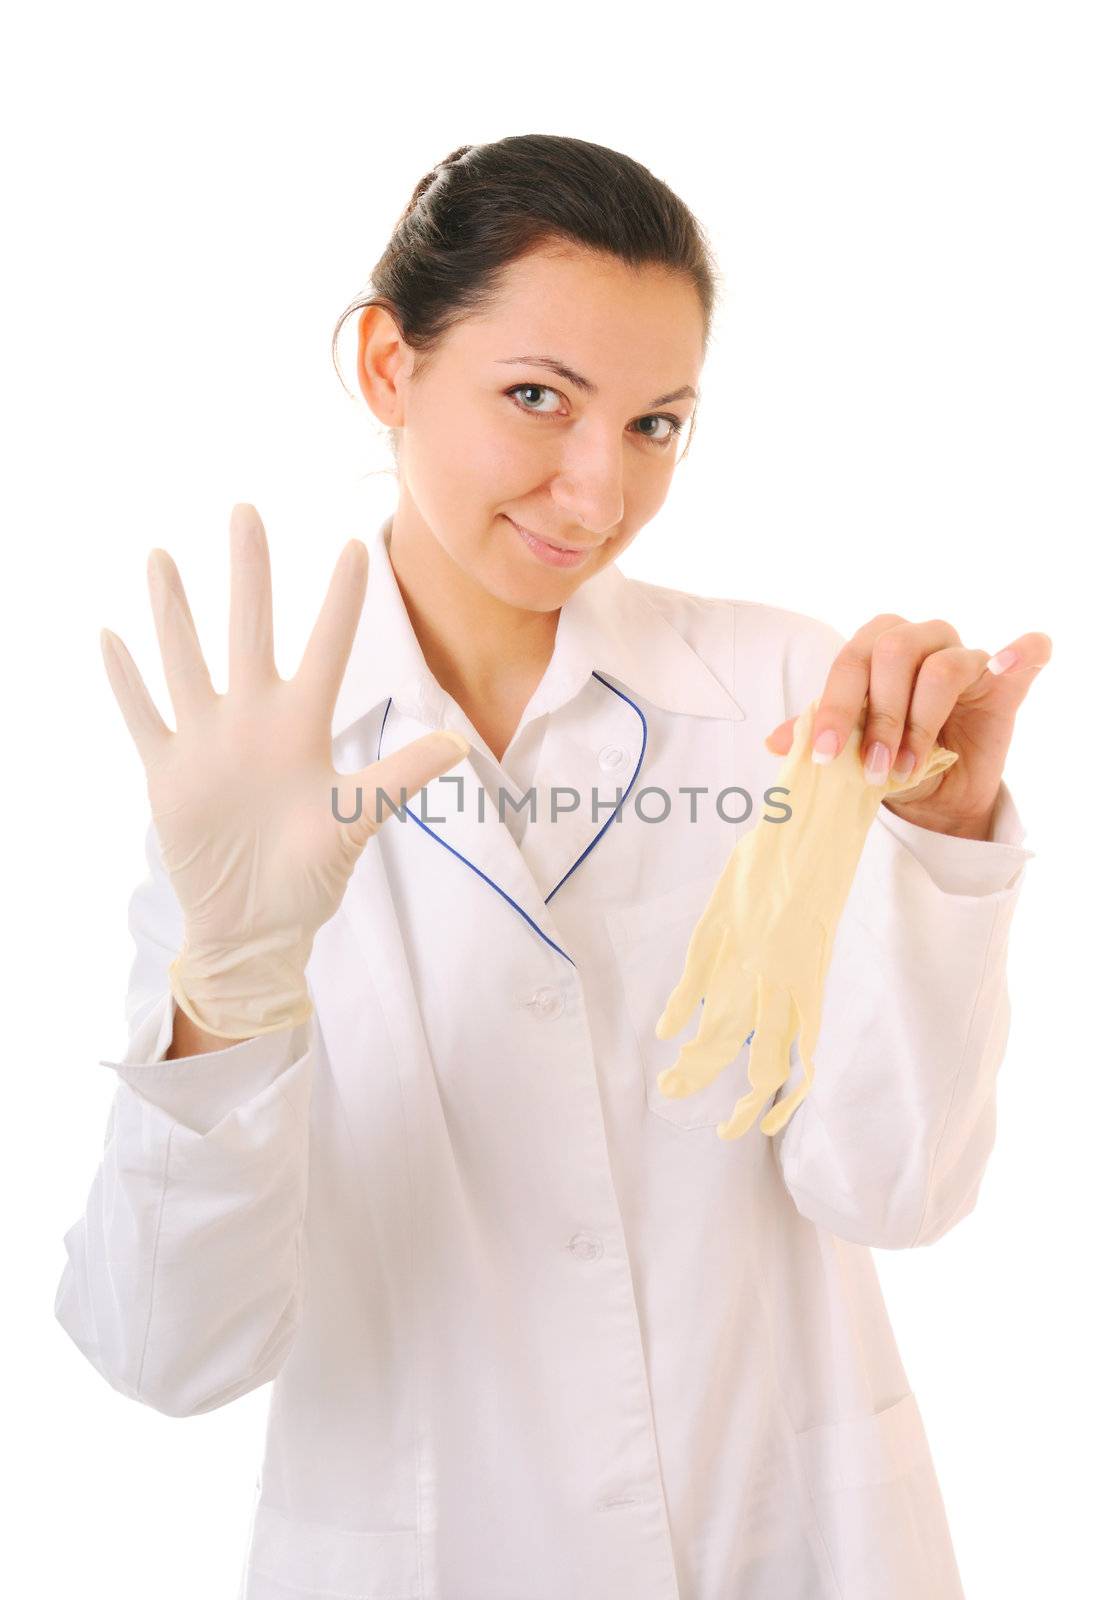 Woman in white coat is demonstrating medical gloves. Isolated on white background.